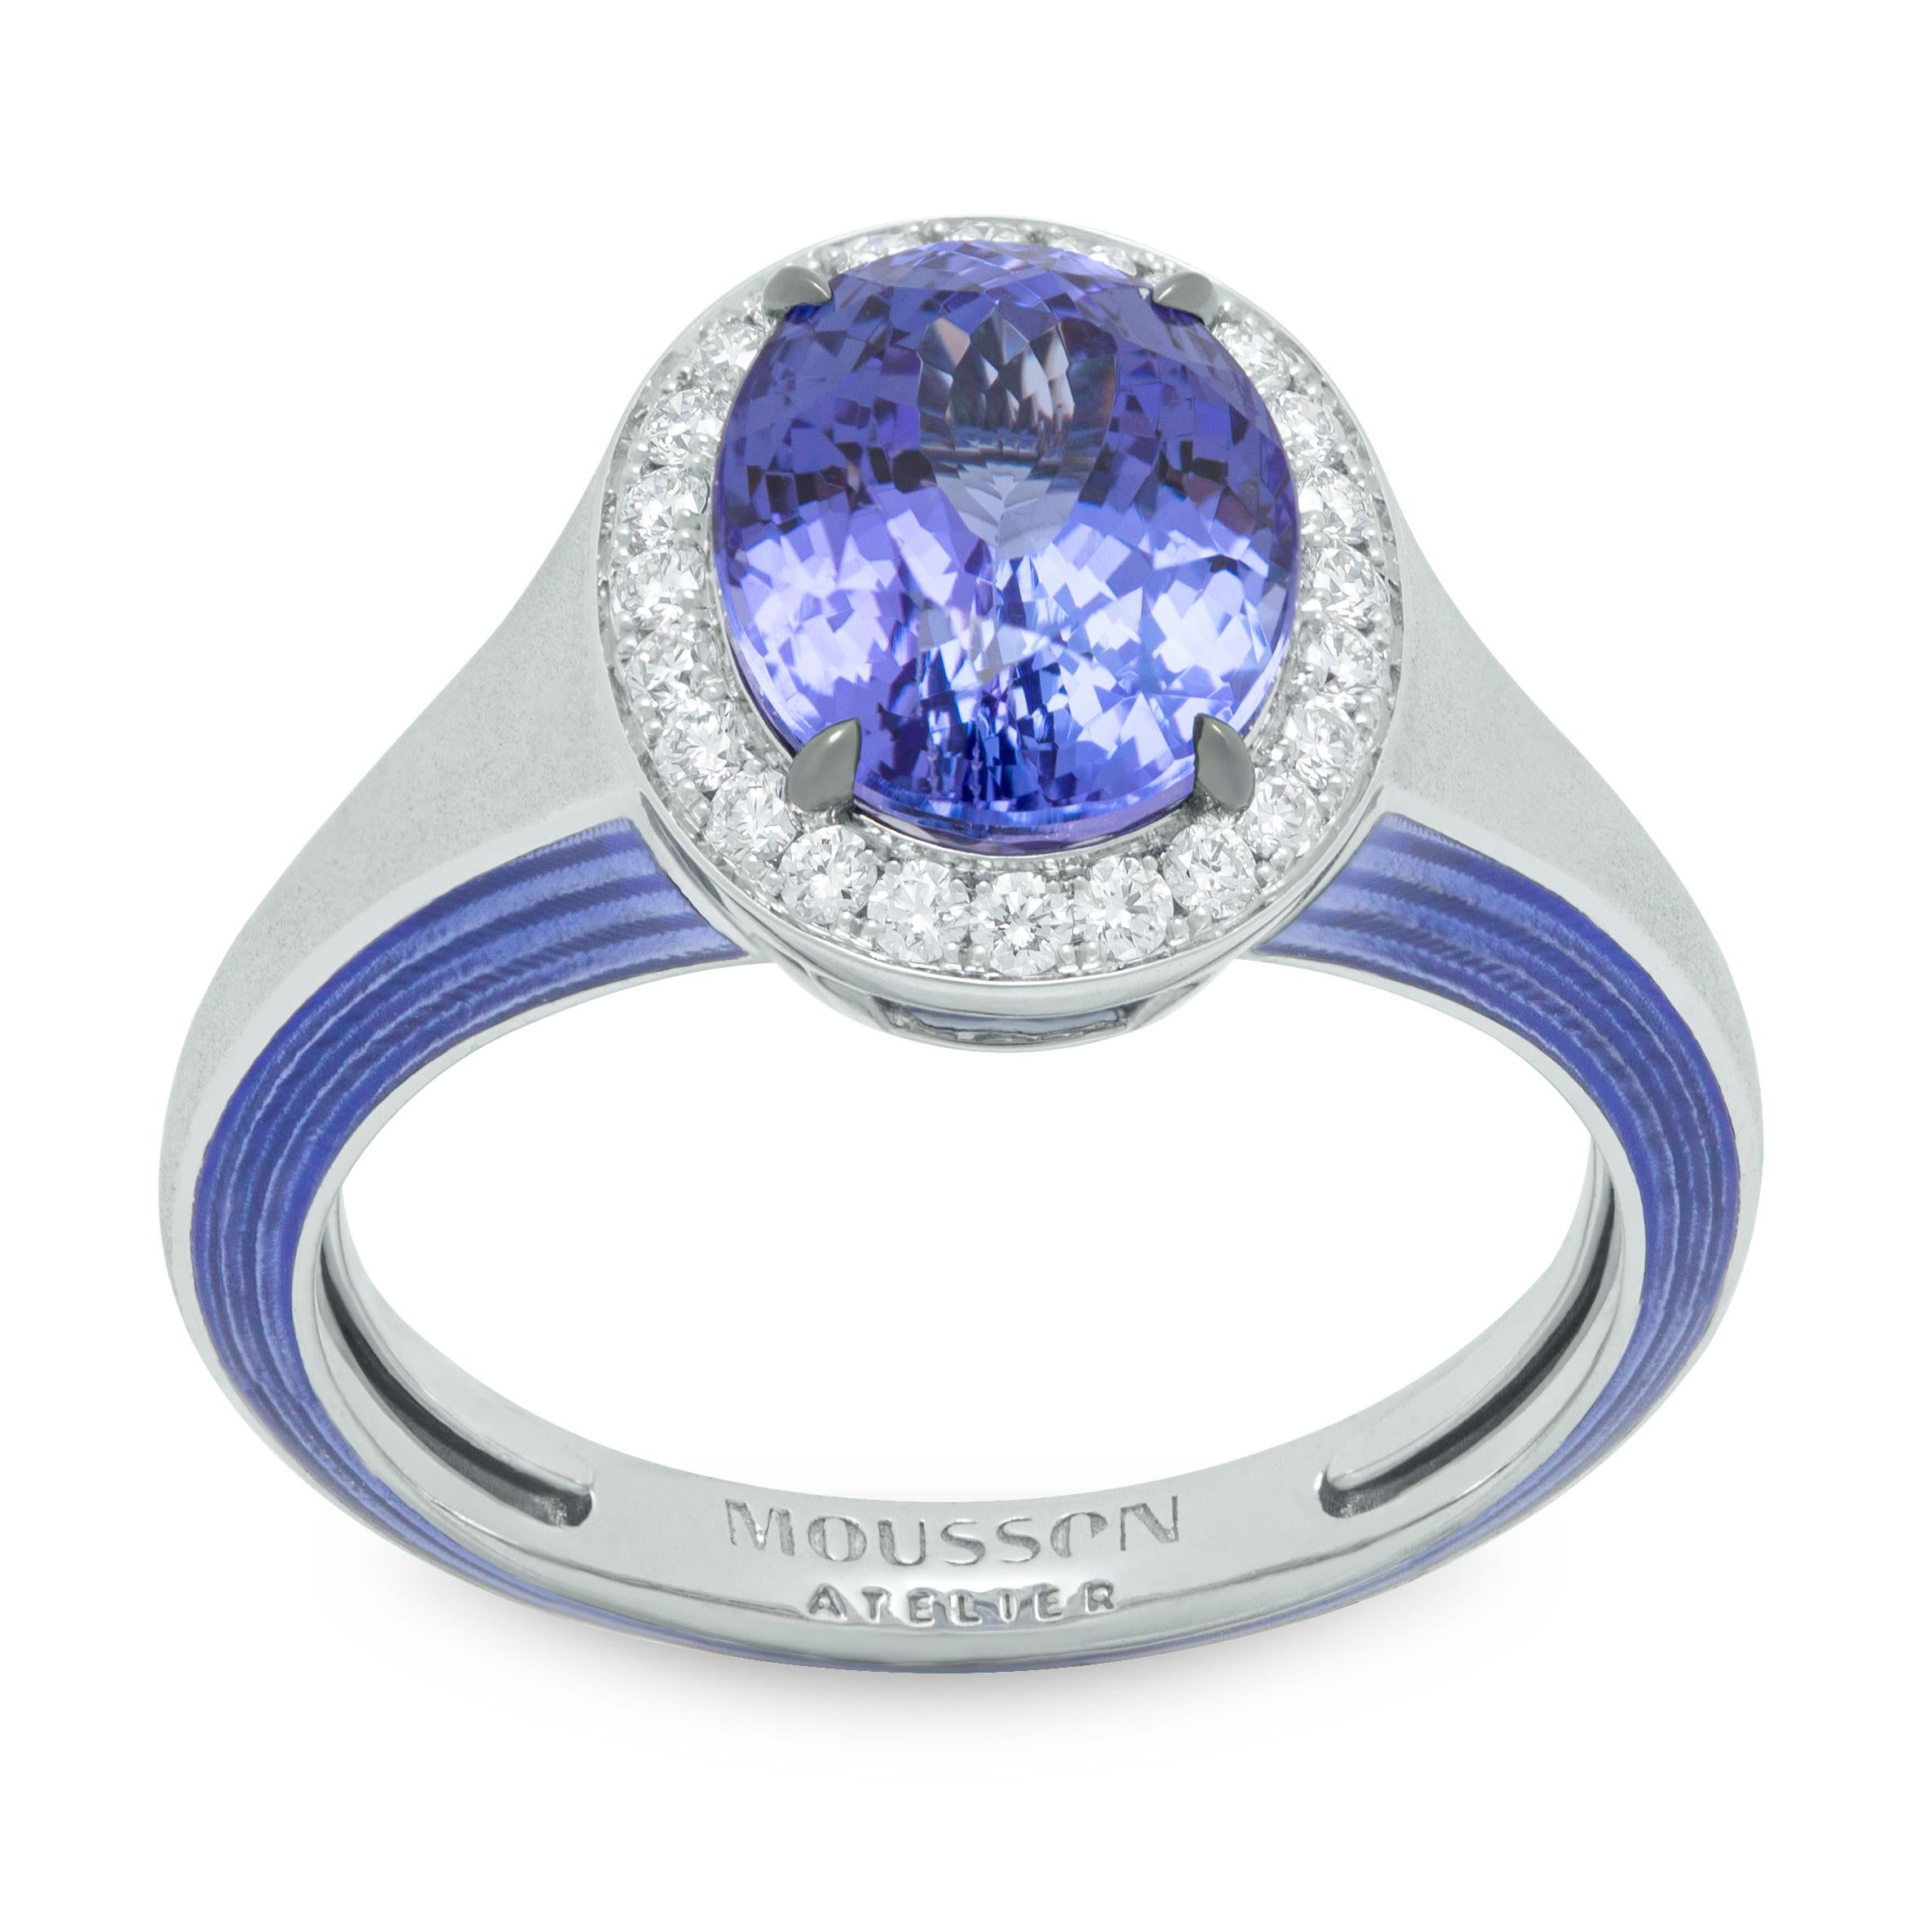 Tanzanite 3.68 Carat Diamonds 18 Karat White Gold Enamel New Classic Ring

Check out this regal Ring, lovingly crafted from 18K White Gold, studded with Tanzanite of 3.68 Carats, 24 Diamonds, and topped with some funky Enamel - a look so luxe,